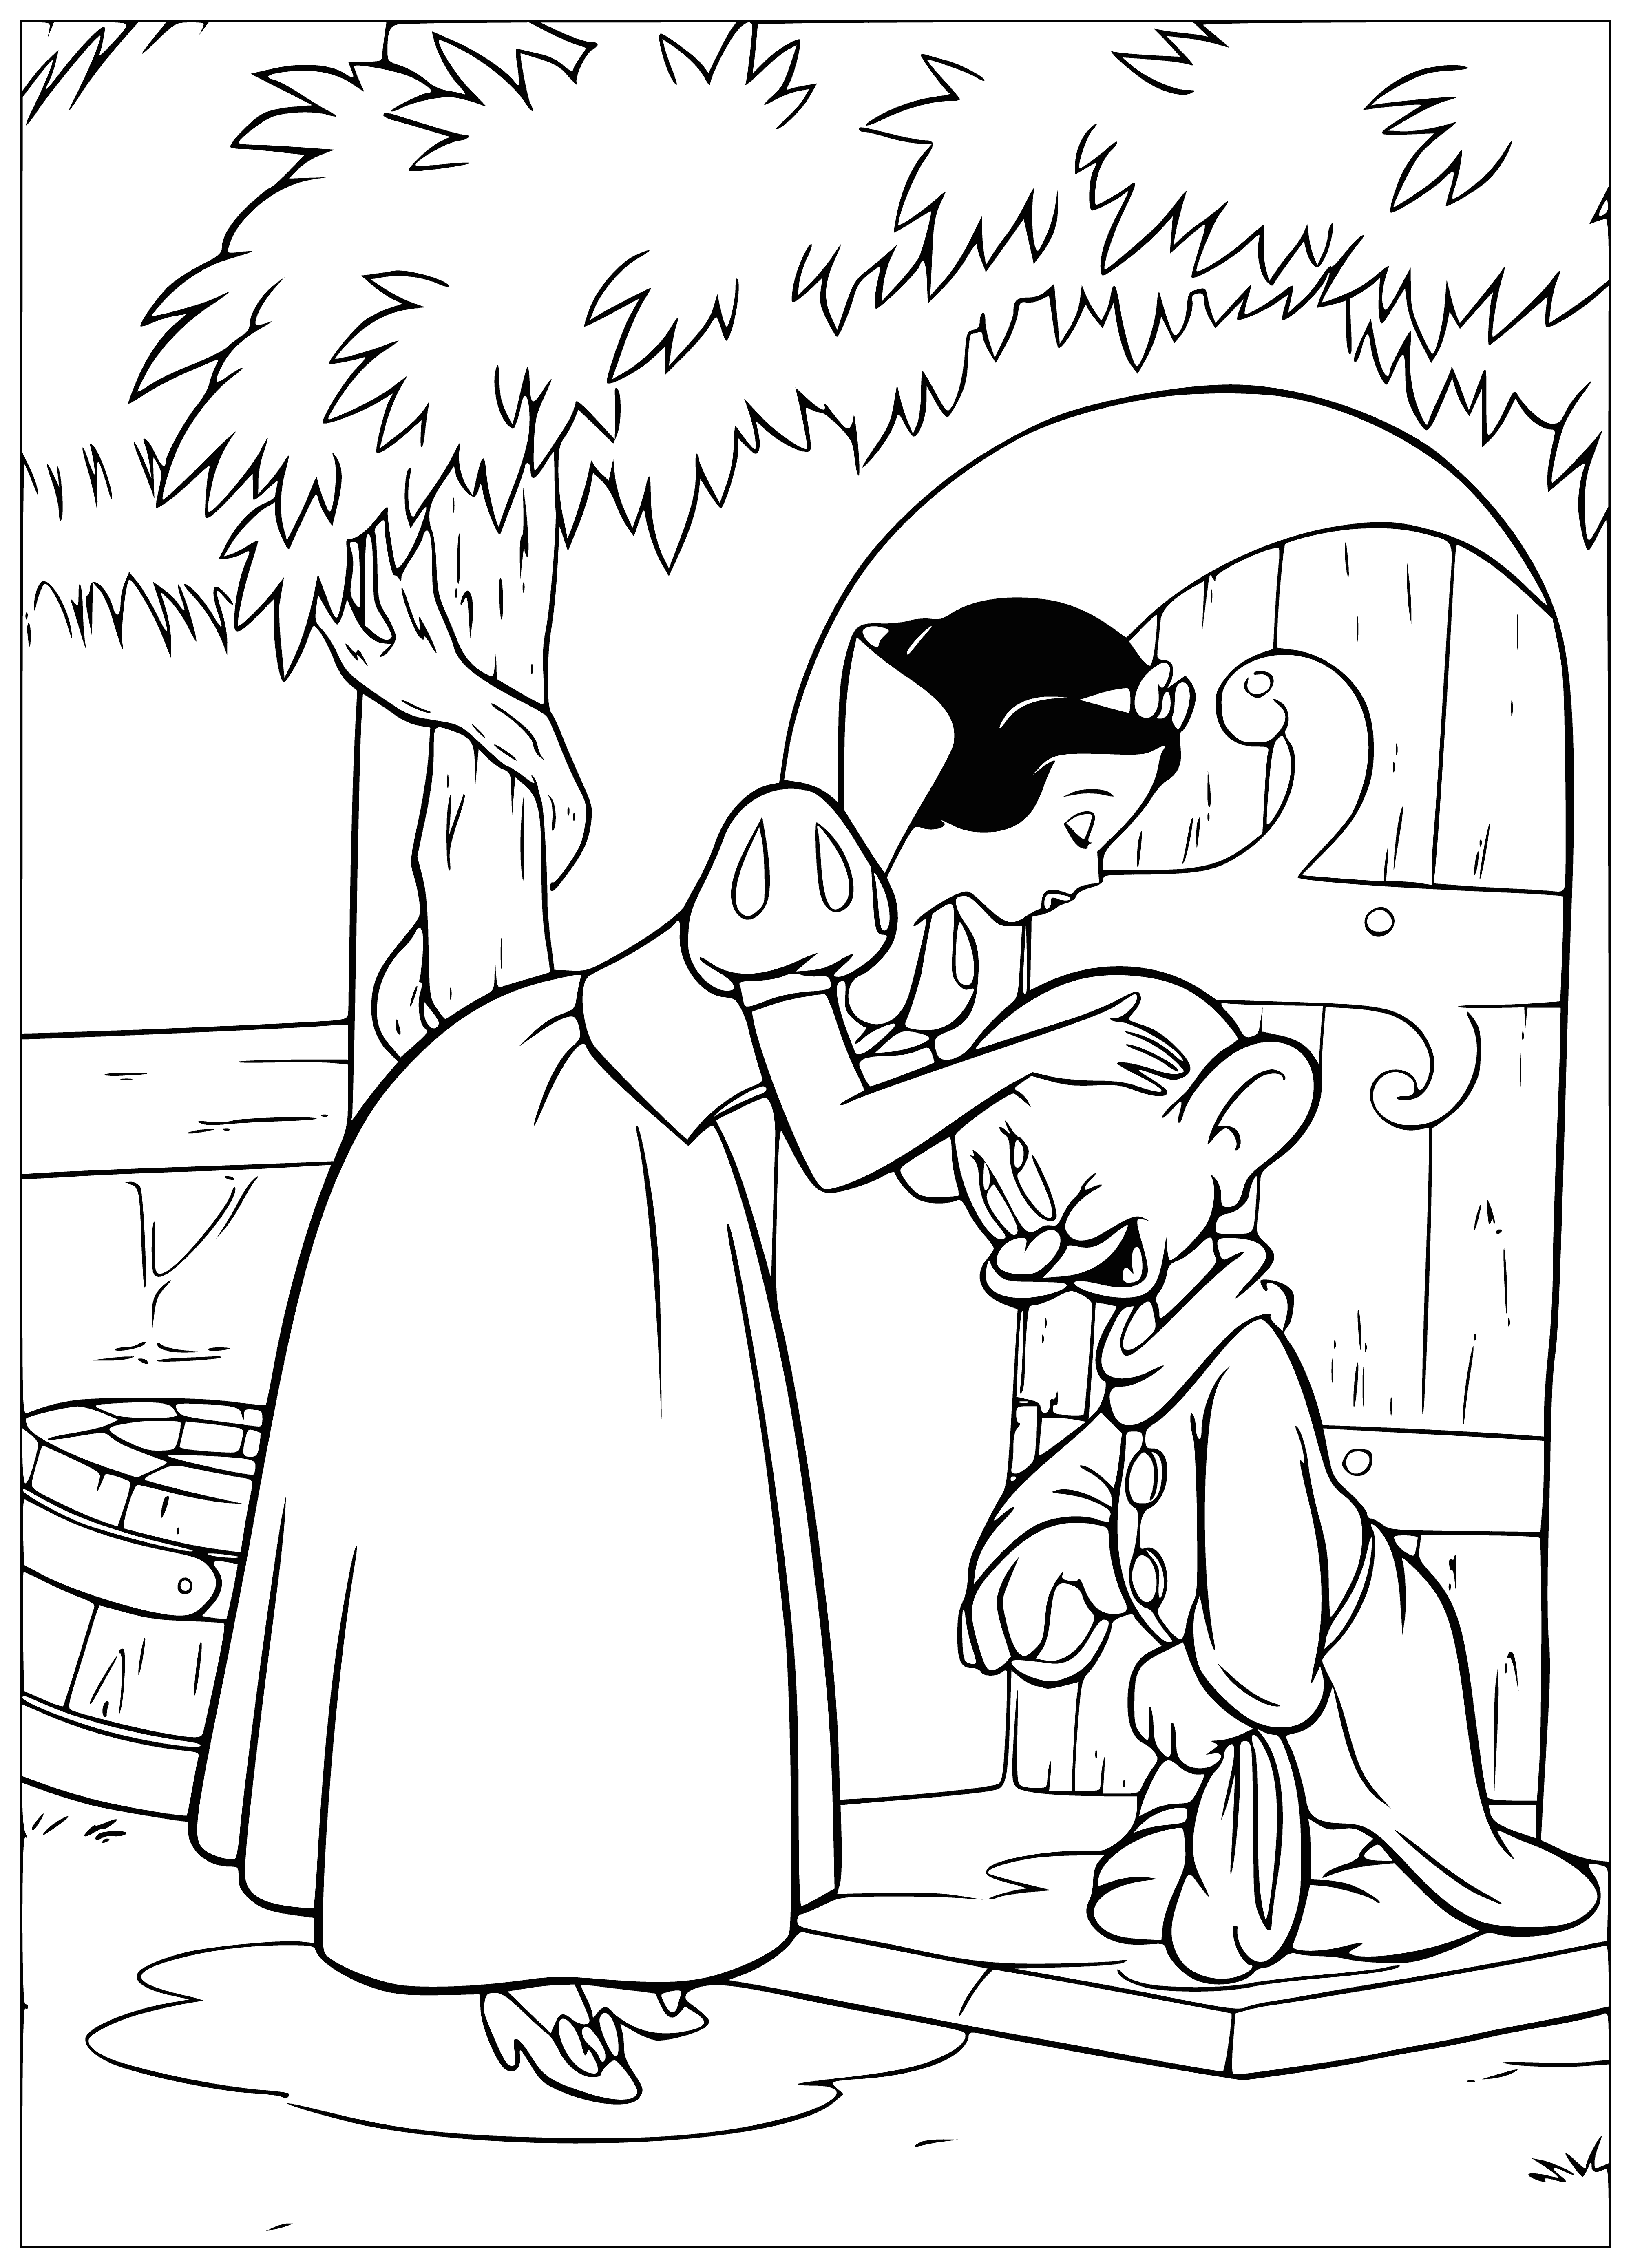 Snow White loves the dwarfs coloring page